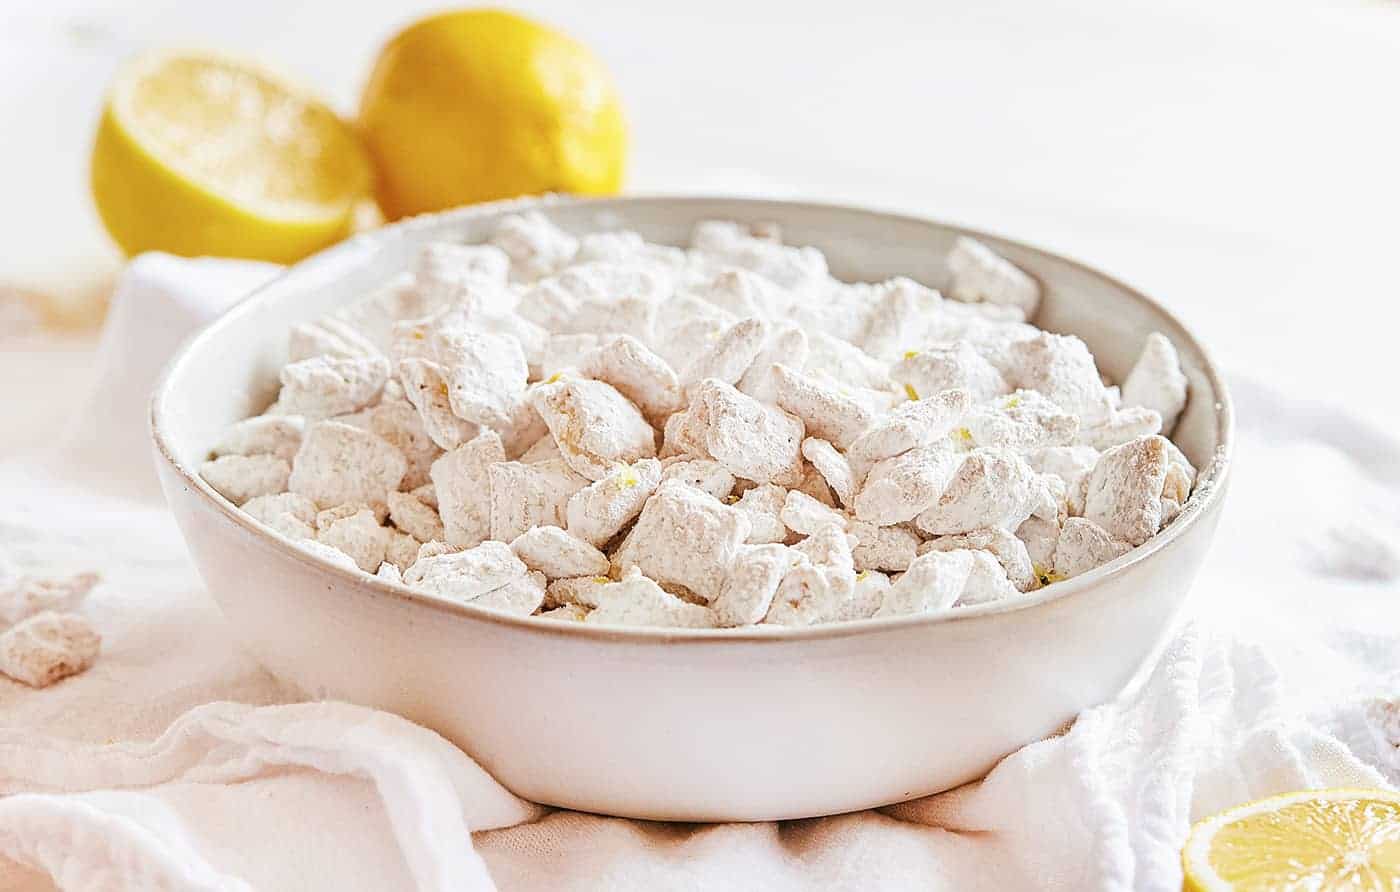 Lemon Puppy Chow in a Bowl